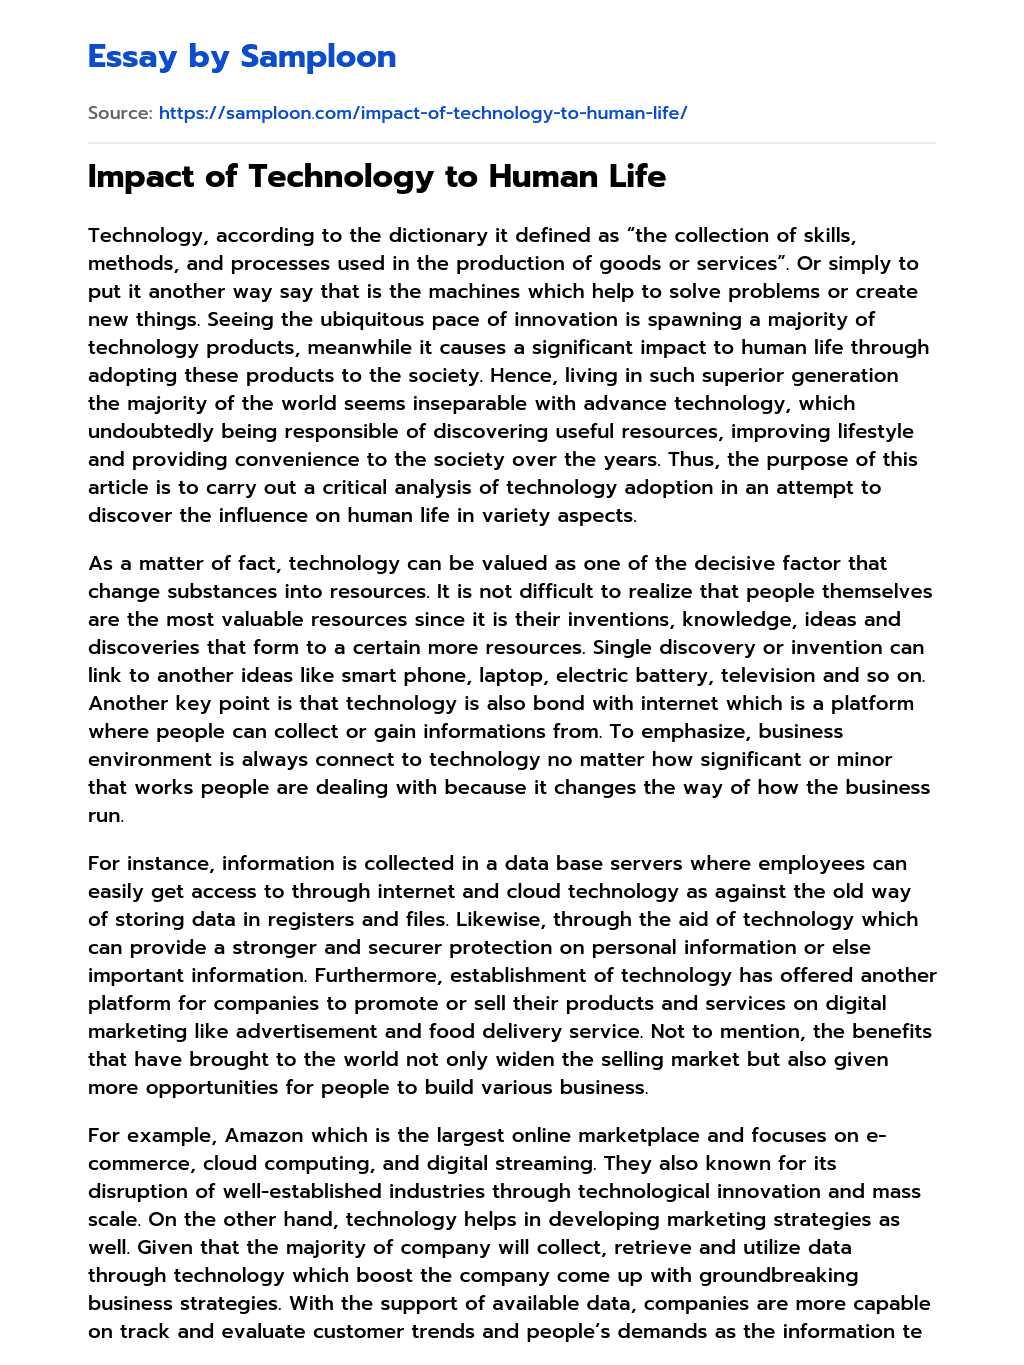 Impact of Technology to Human Life essay